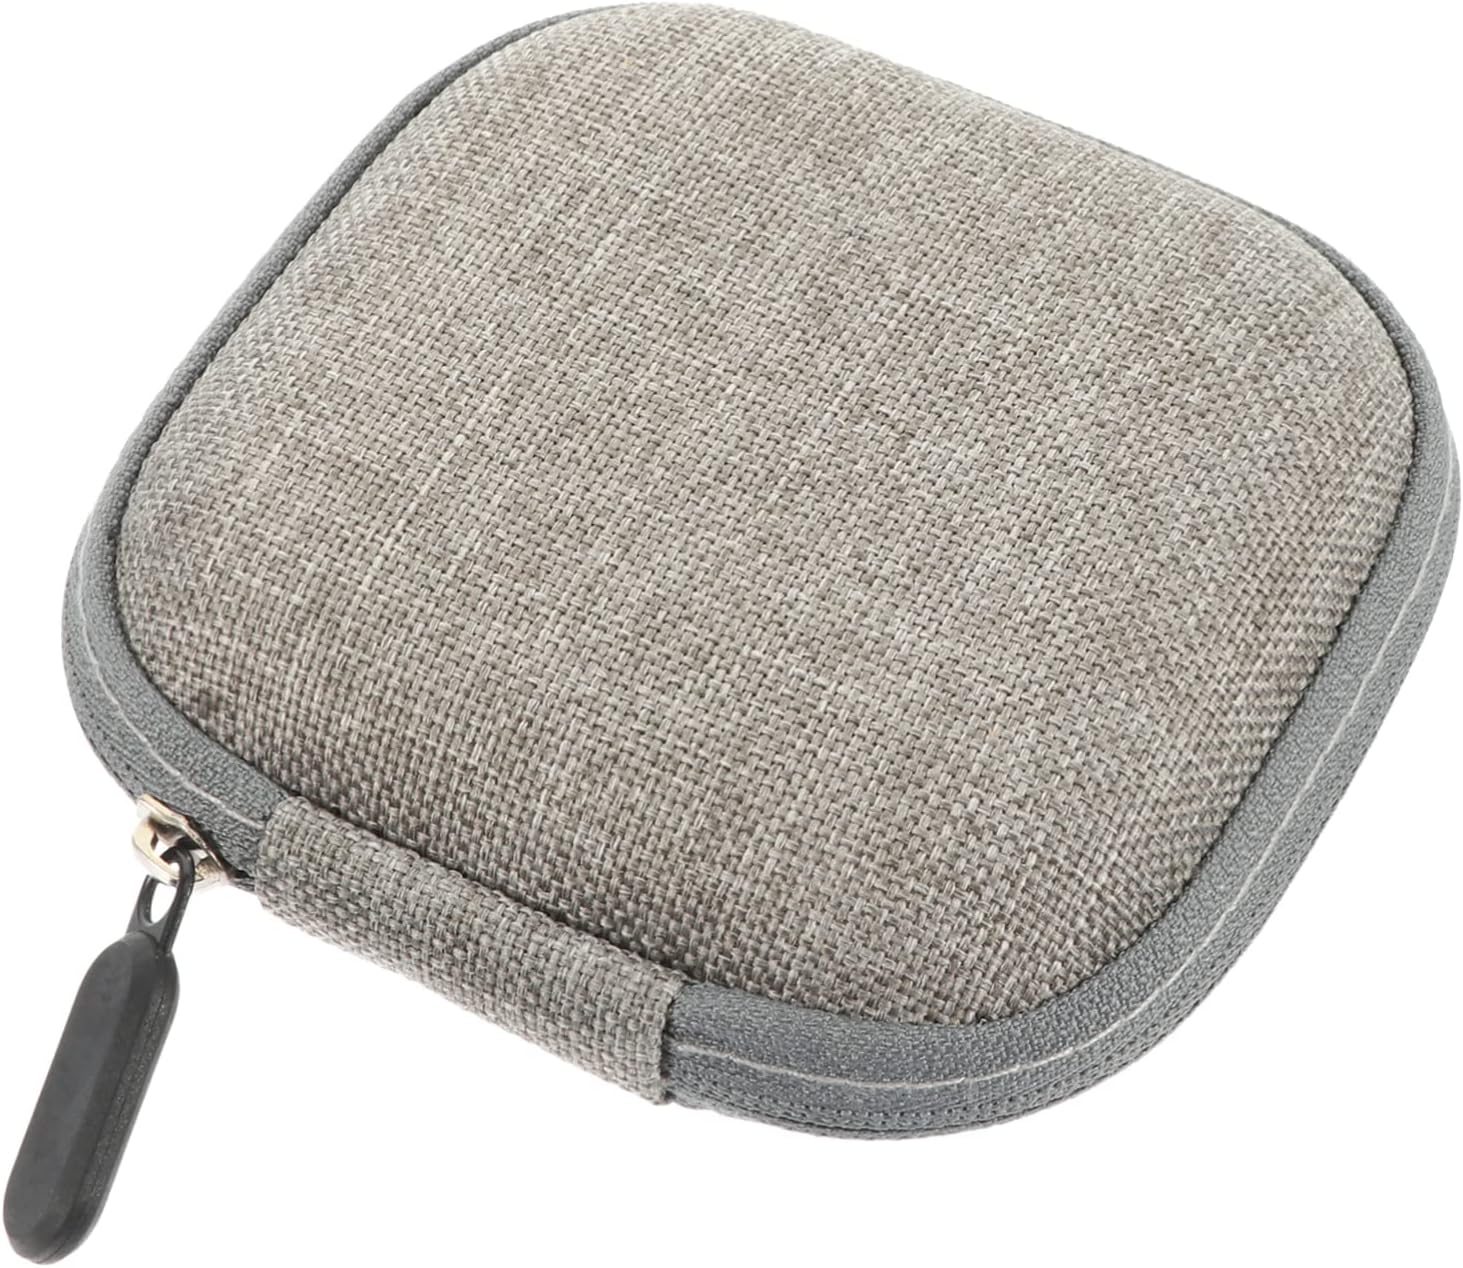 Storage Bag Travel Accessories Bag Travel Storage Bag Small Change Purse Earbuds Carrying Case Bag Case Earbuds Pouch Bag Eva Grey Digital Accessory Bag Storage Case Bags